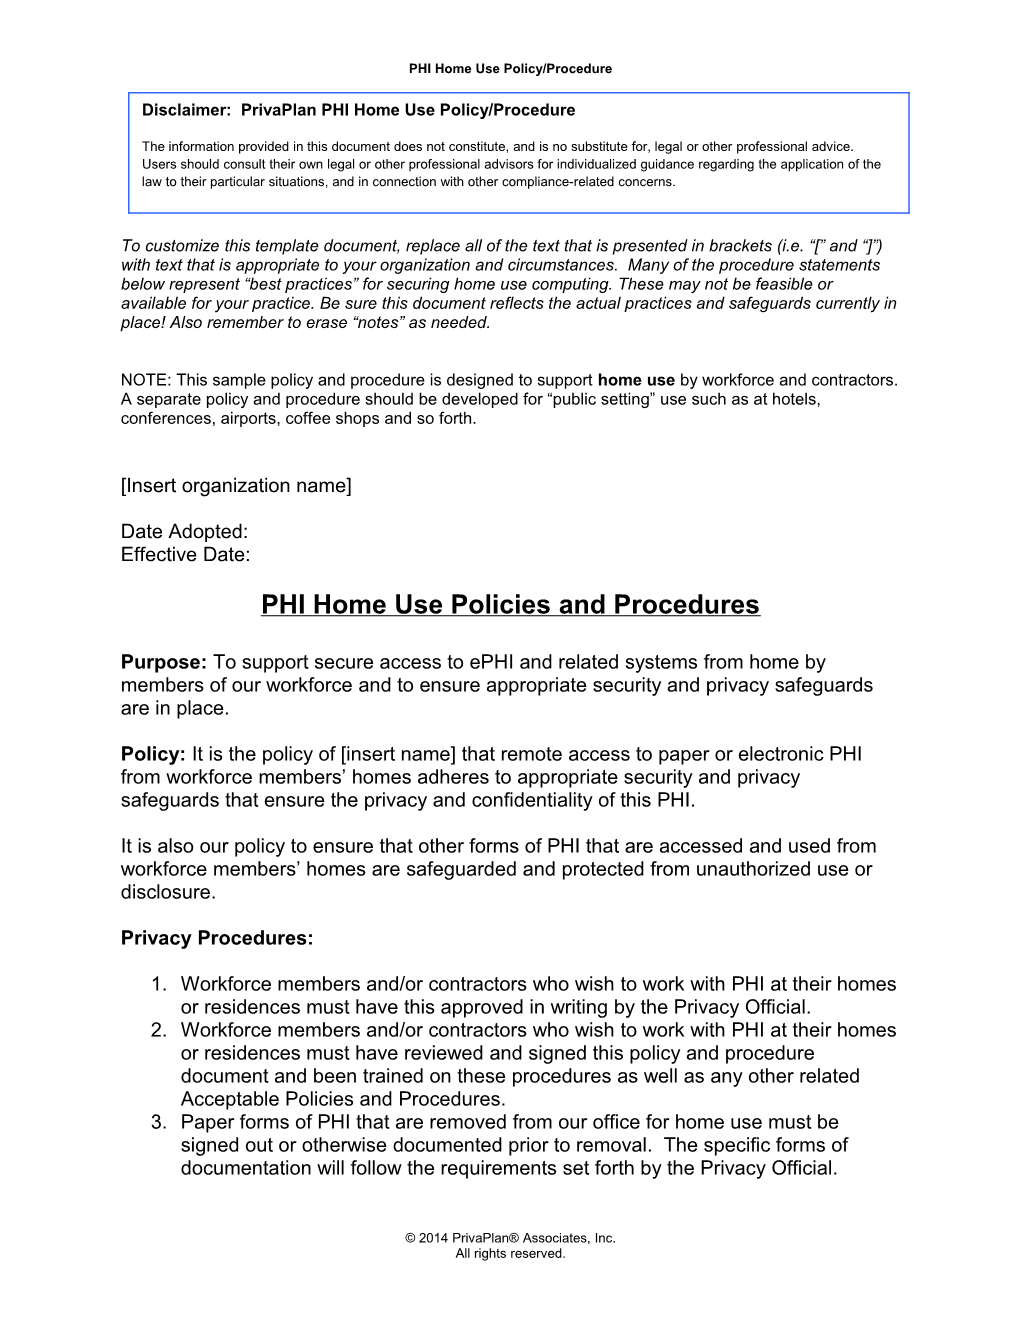 PHI Home Use Policy/Procedure